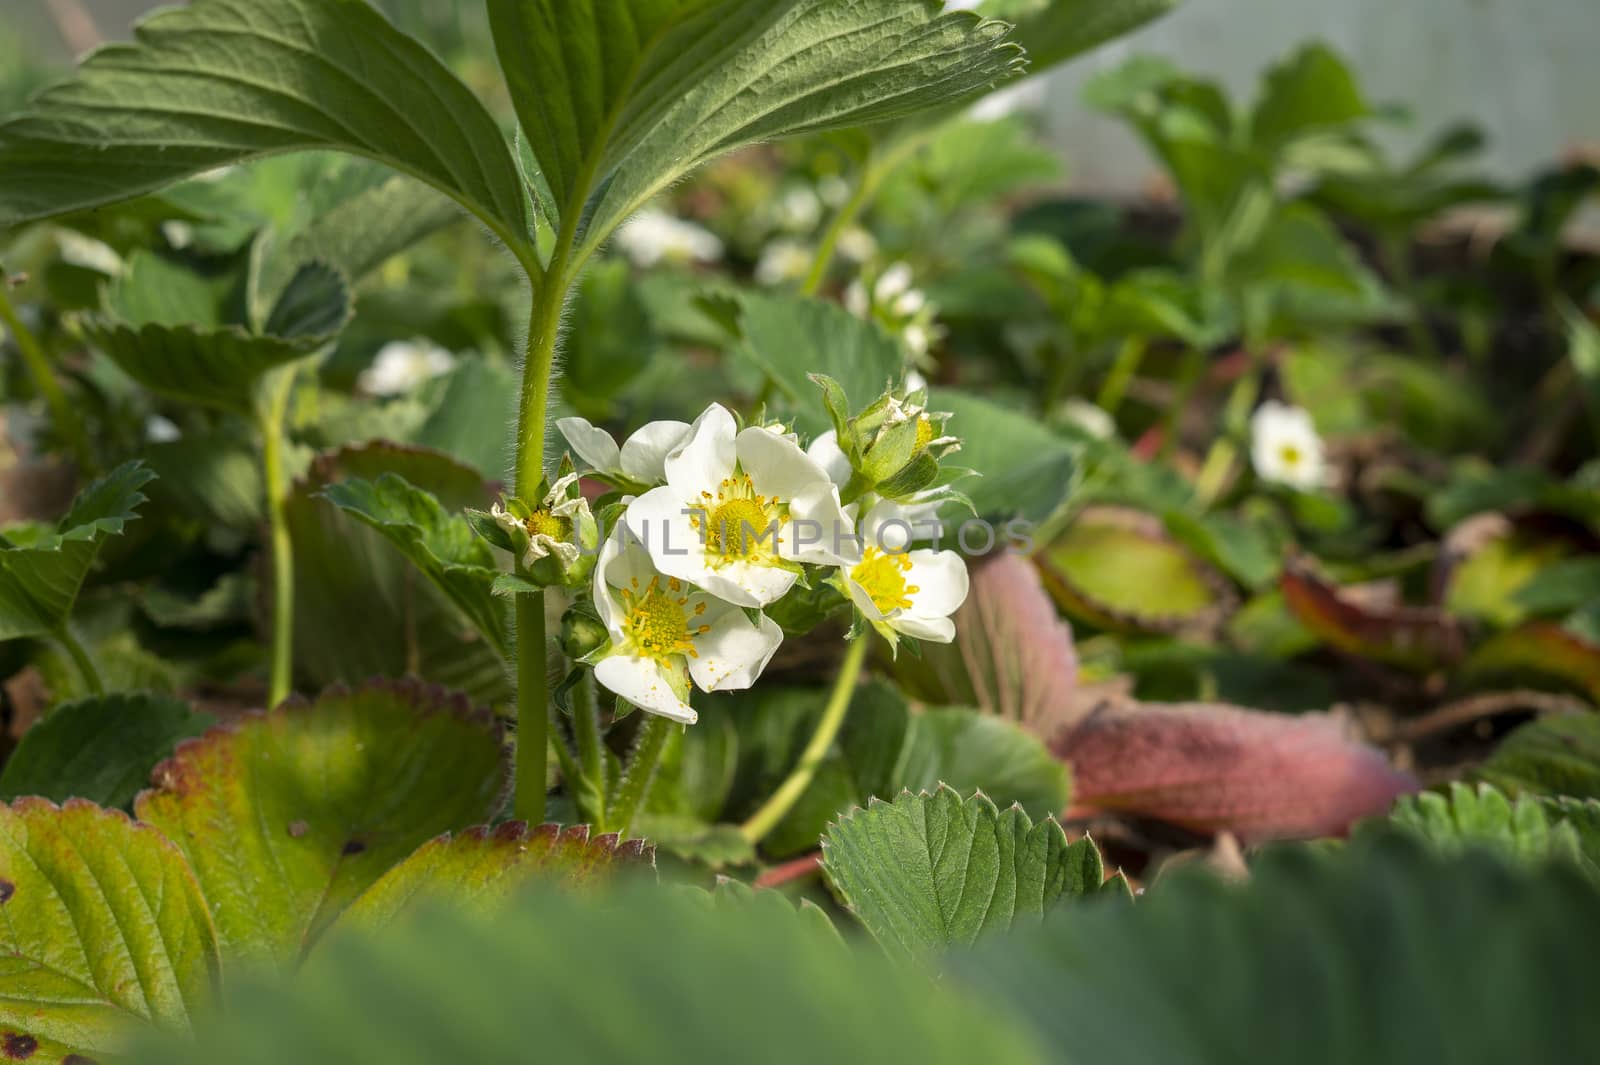 Close up on the white flowers of a strawberry plants growing outdoors in the garden with drops of water on the petals